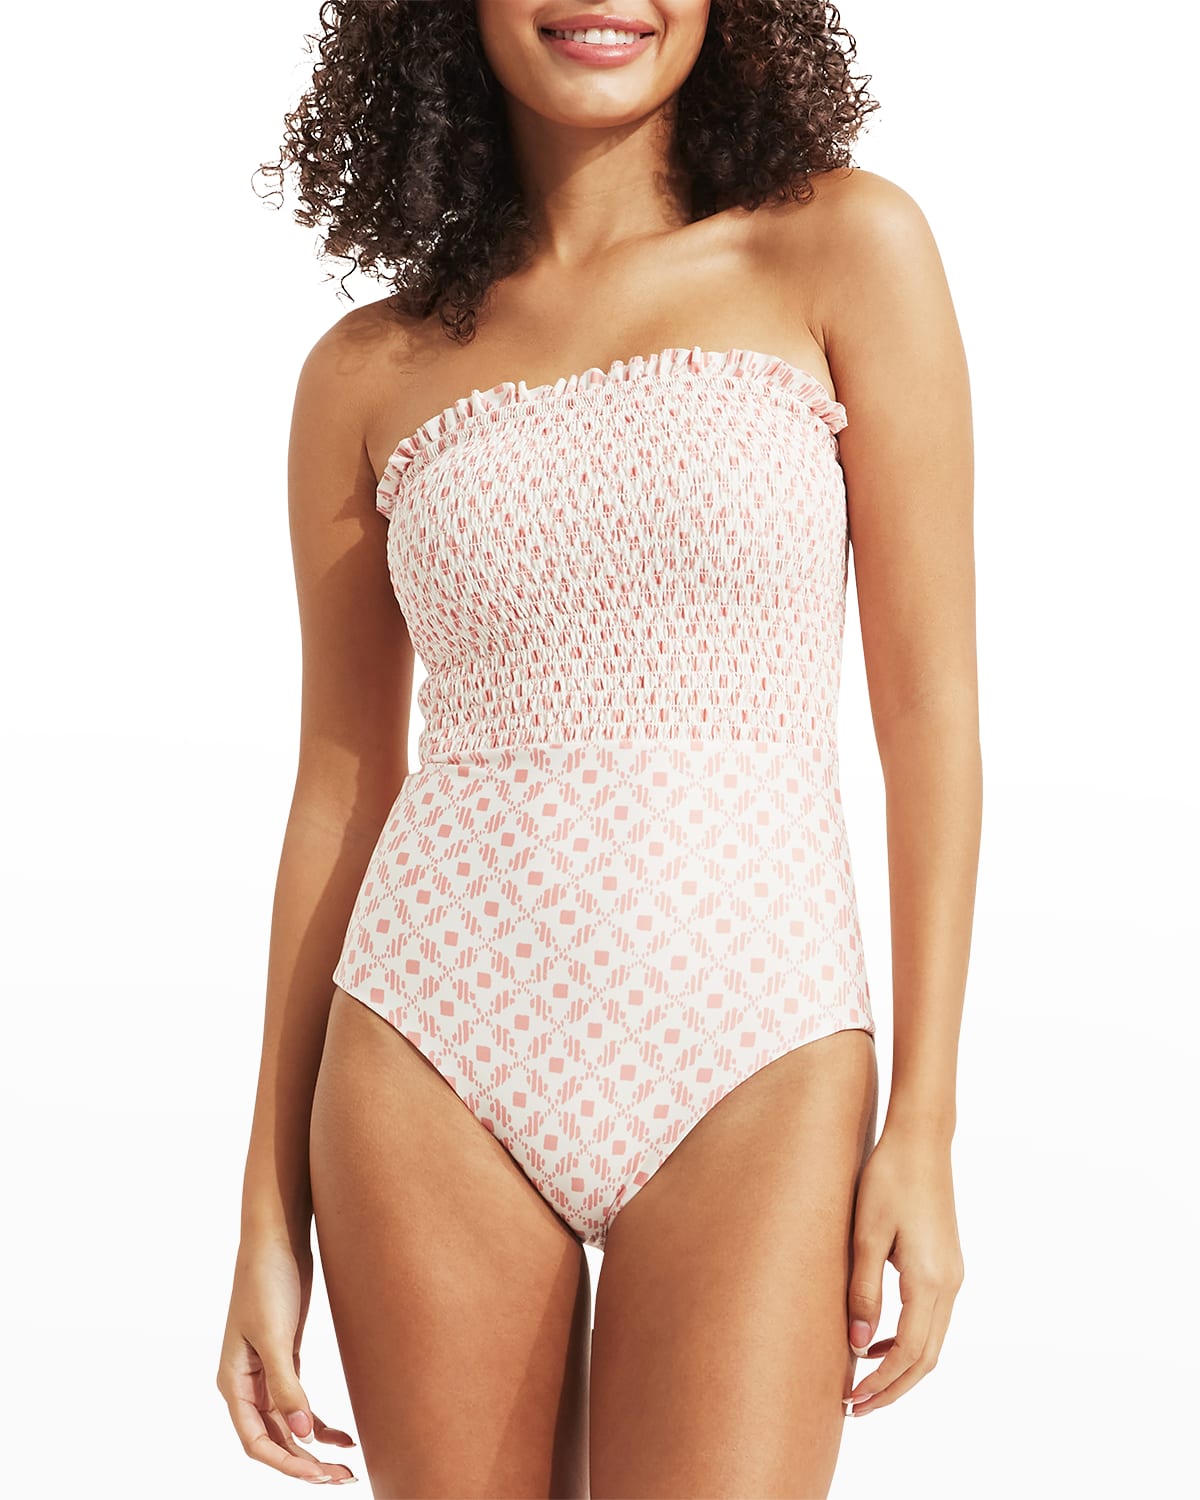 HERMOZA Carrie Smocked One-Piece Swimsuit